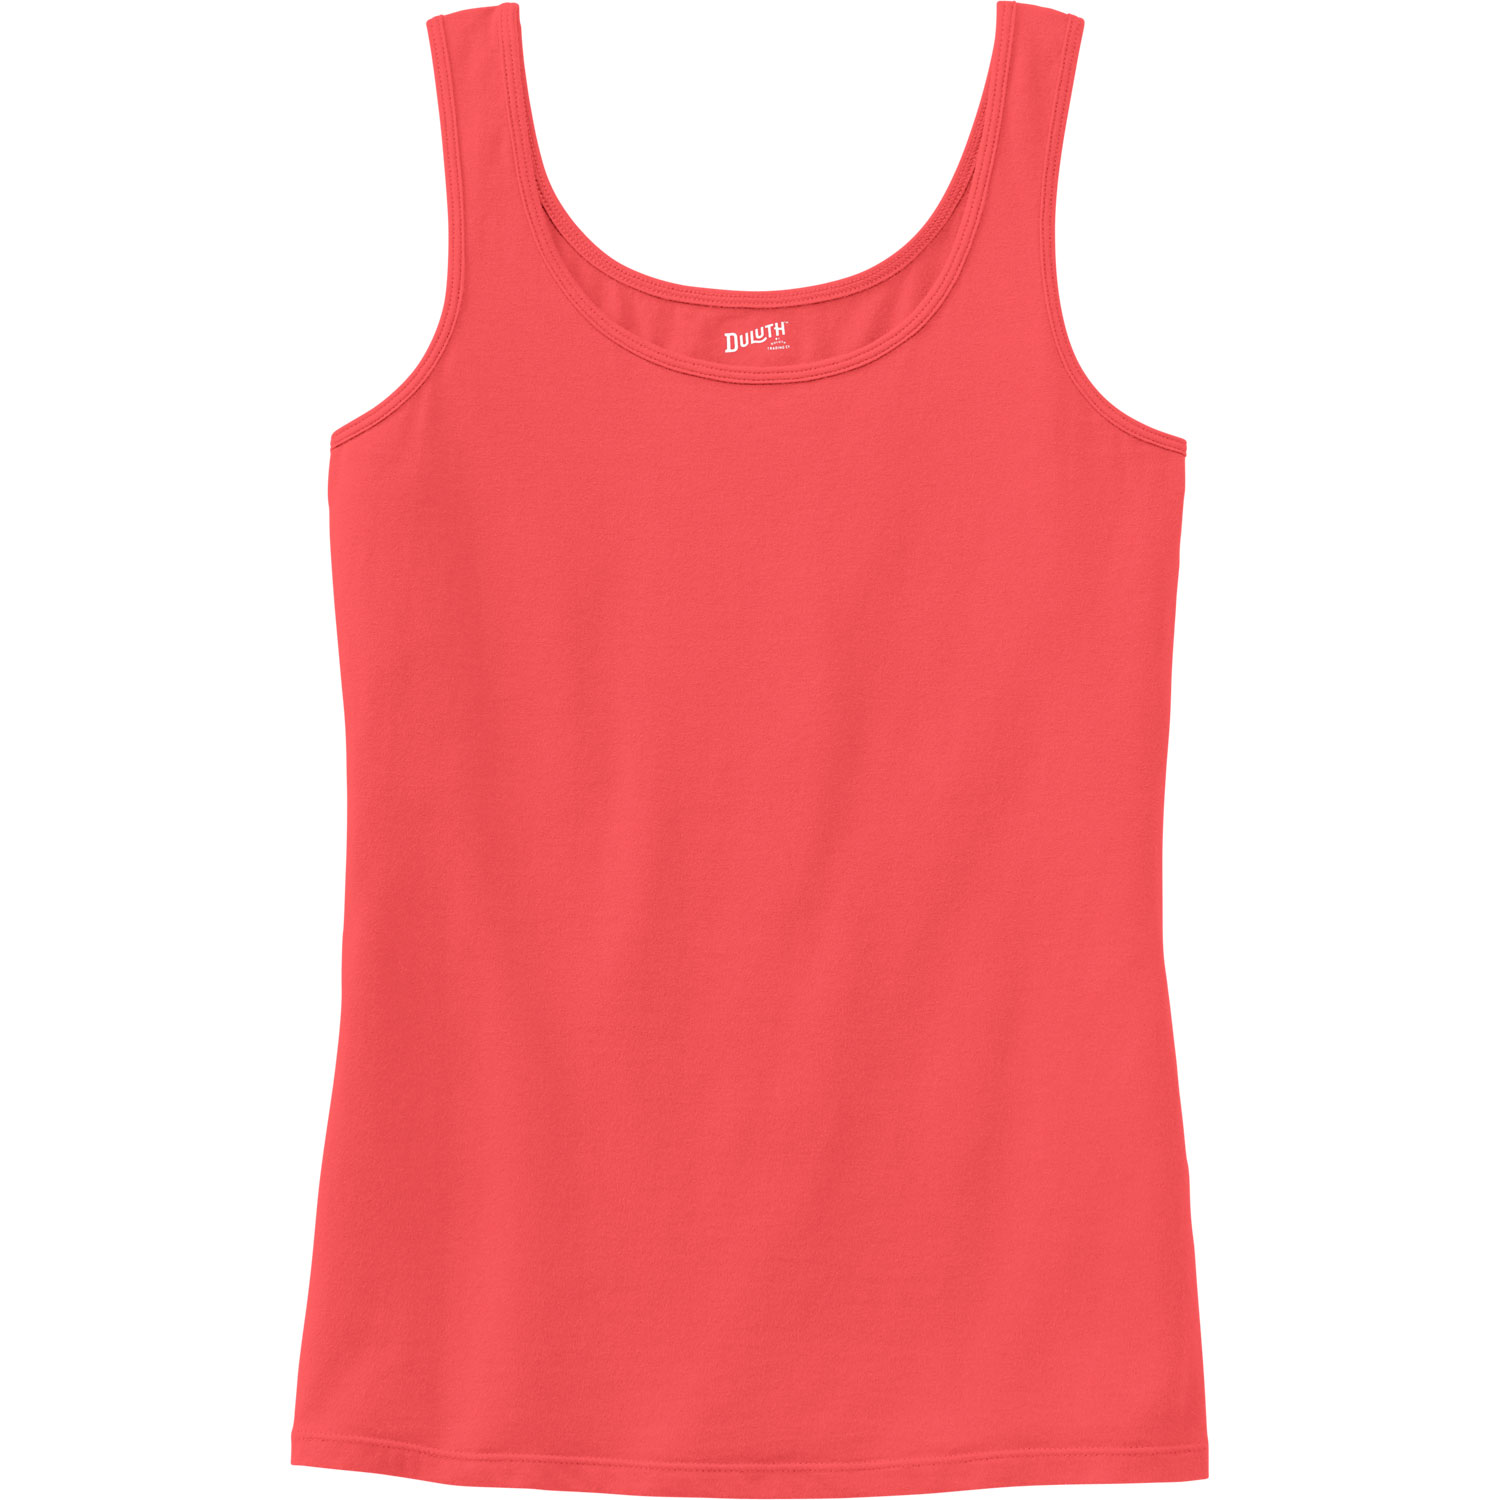 Women's Core 10 Sleeveless and tank tops from $20